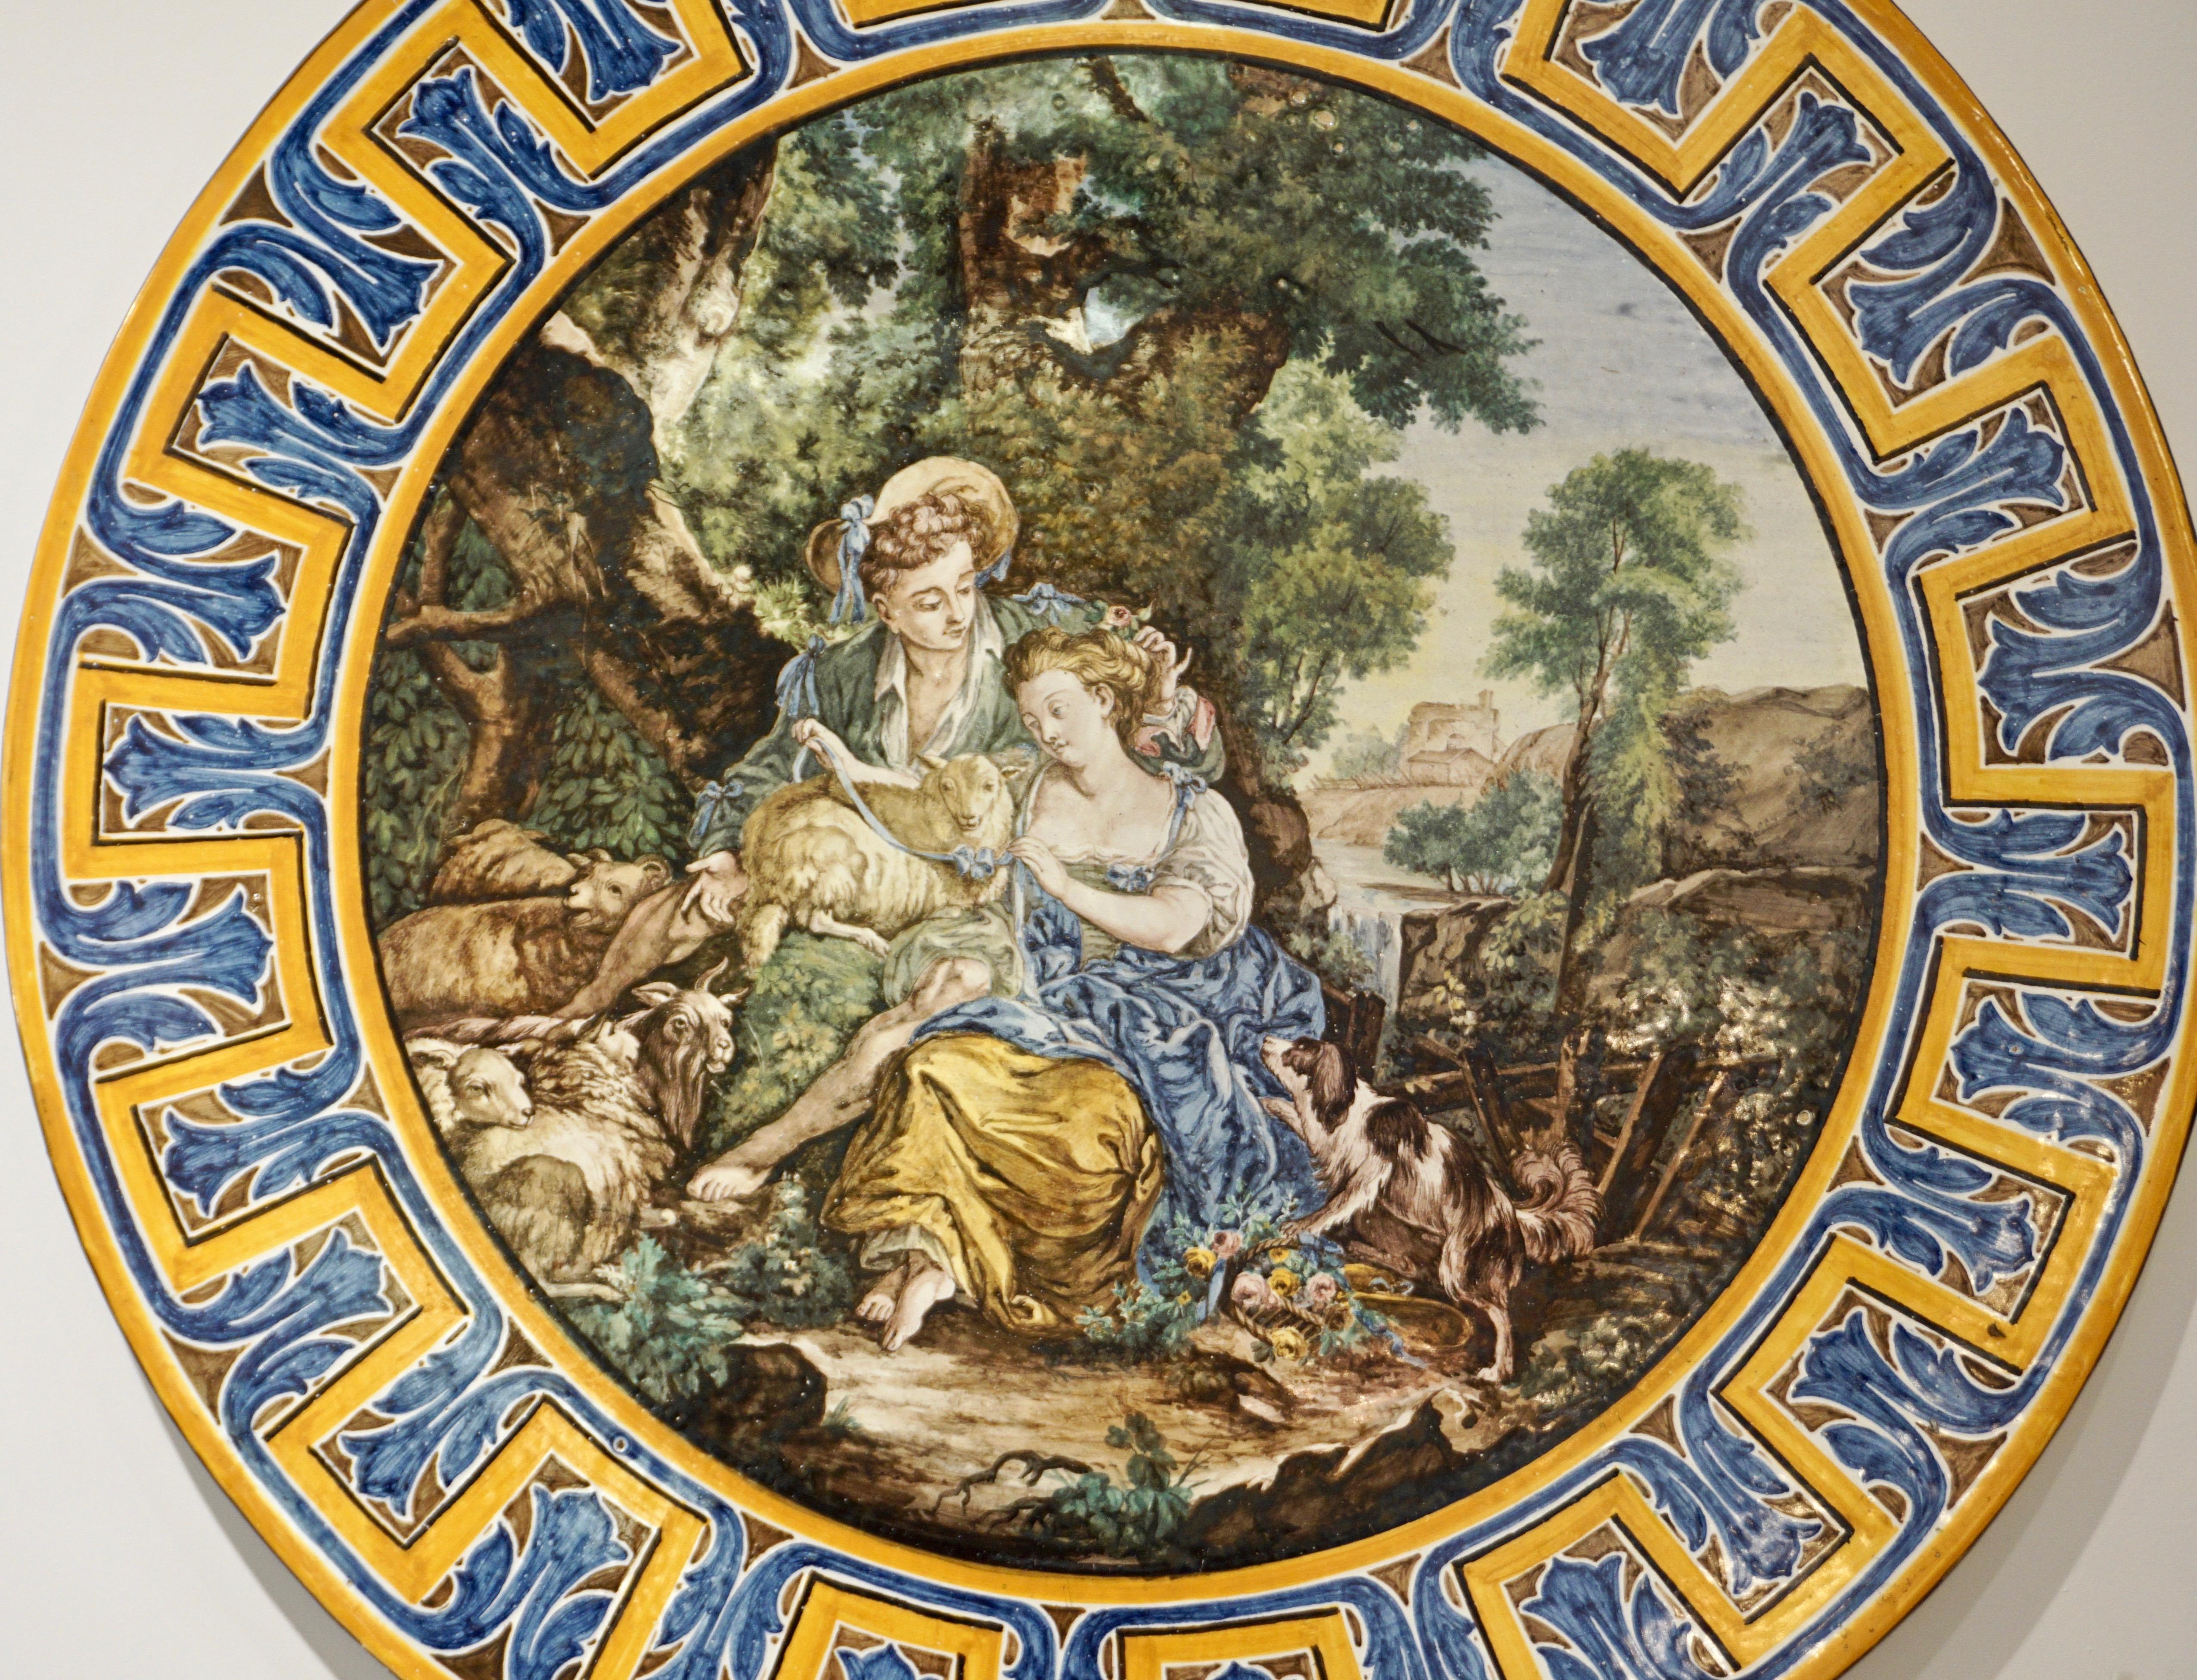 Late 19th century, very large earthenware ceramic sculpture platter or charger, of the French Second Empire period, entirely hand painted in Francois Boucher style, the romantic and subtly erotic scene as a central medallion depicts a young shepherd